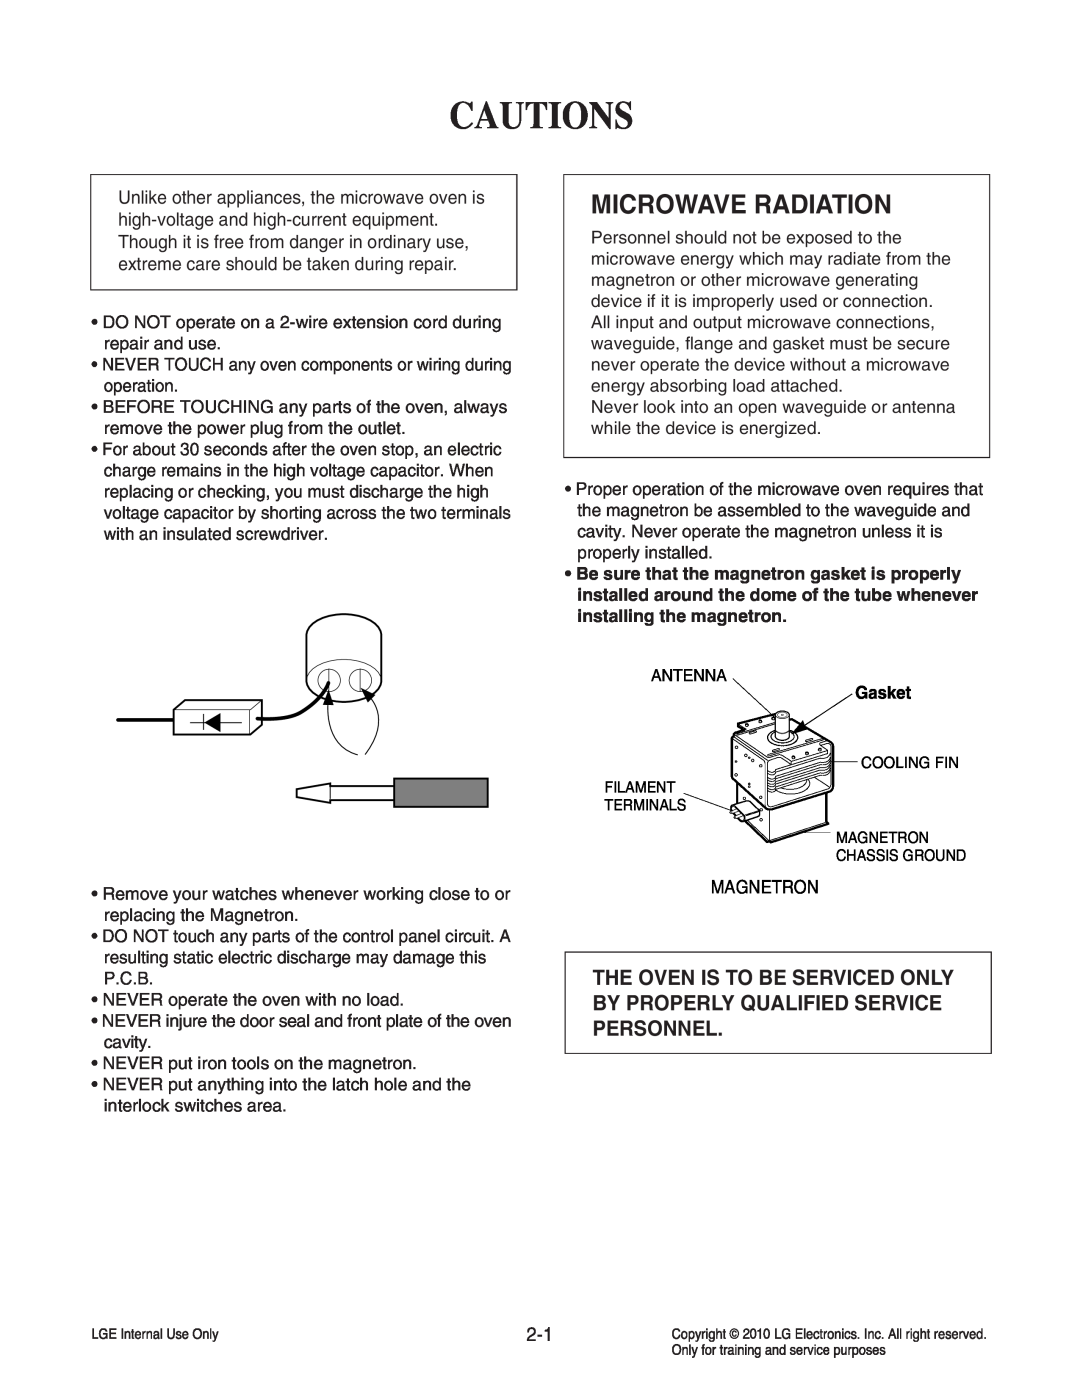 Frigidaire LCRT2010ST service manual Cautions, Microwave Radiation, Magnetron, Gasket 